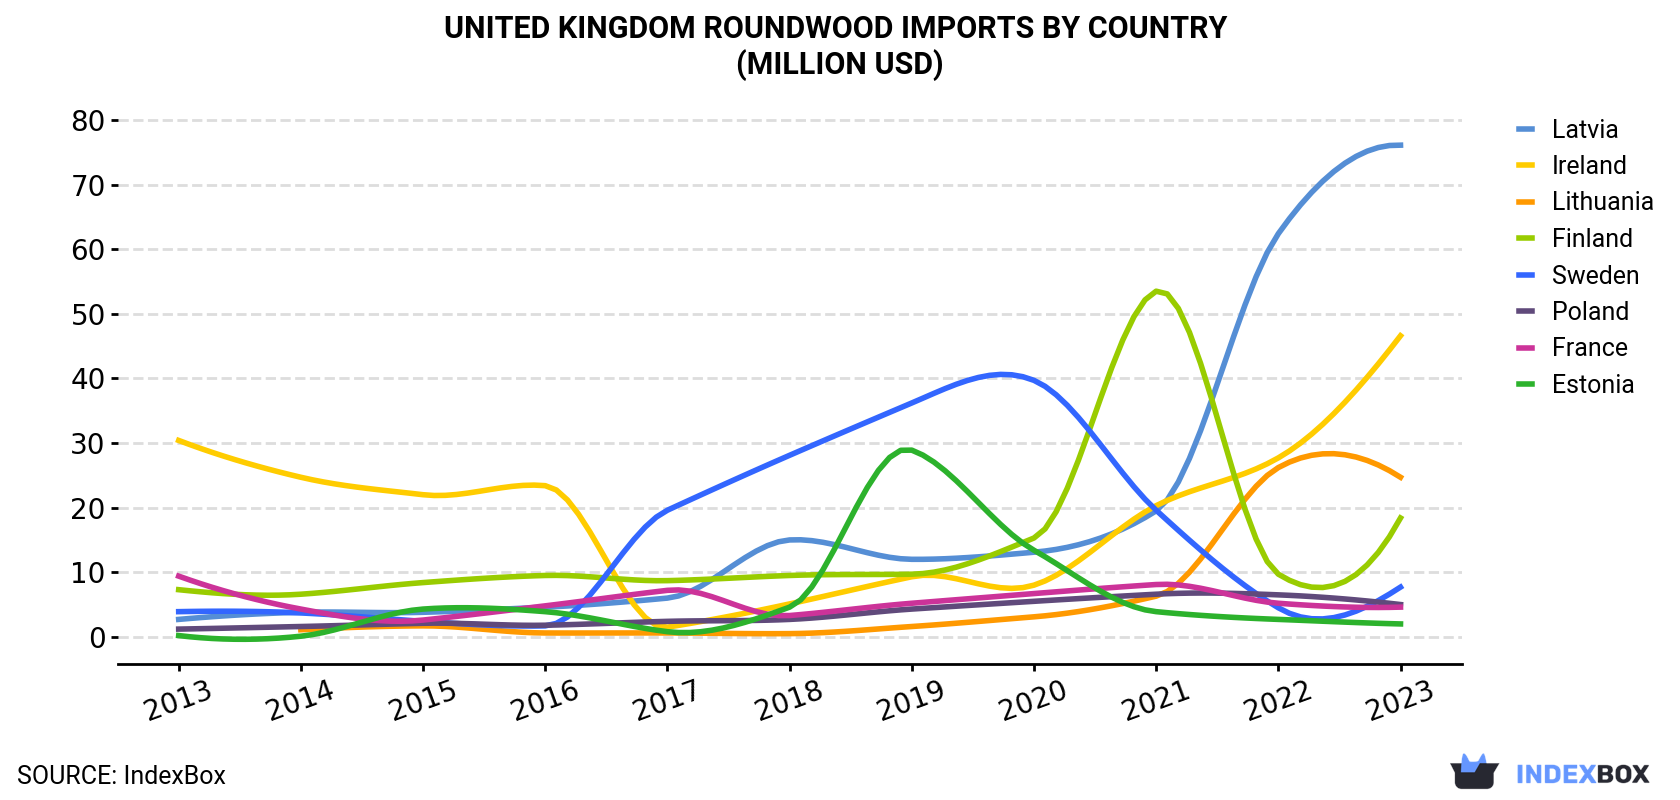 United Kingdom Roundwood Imports By Country (Million USD)